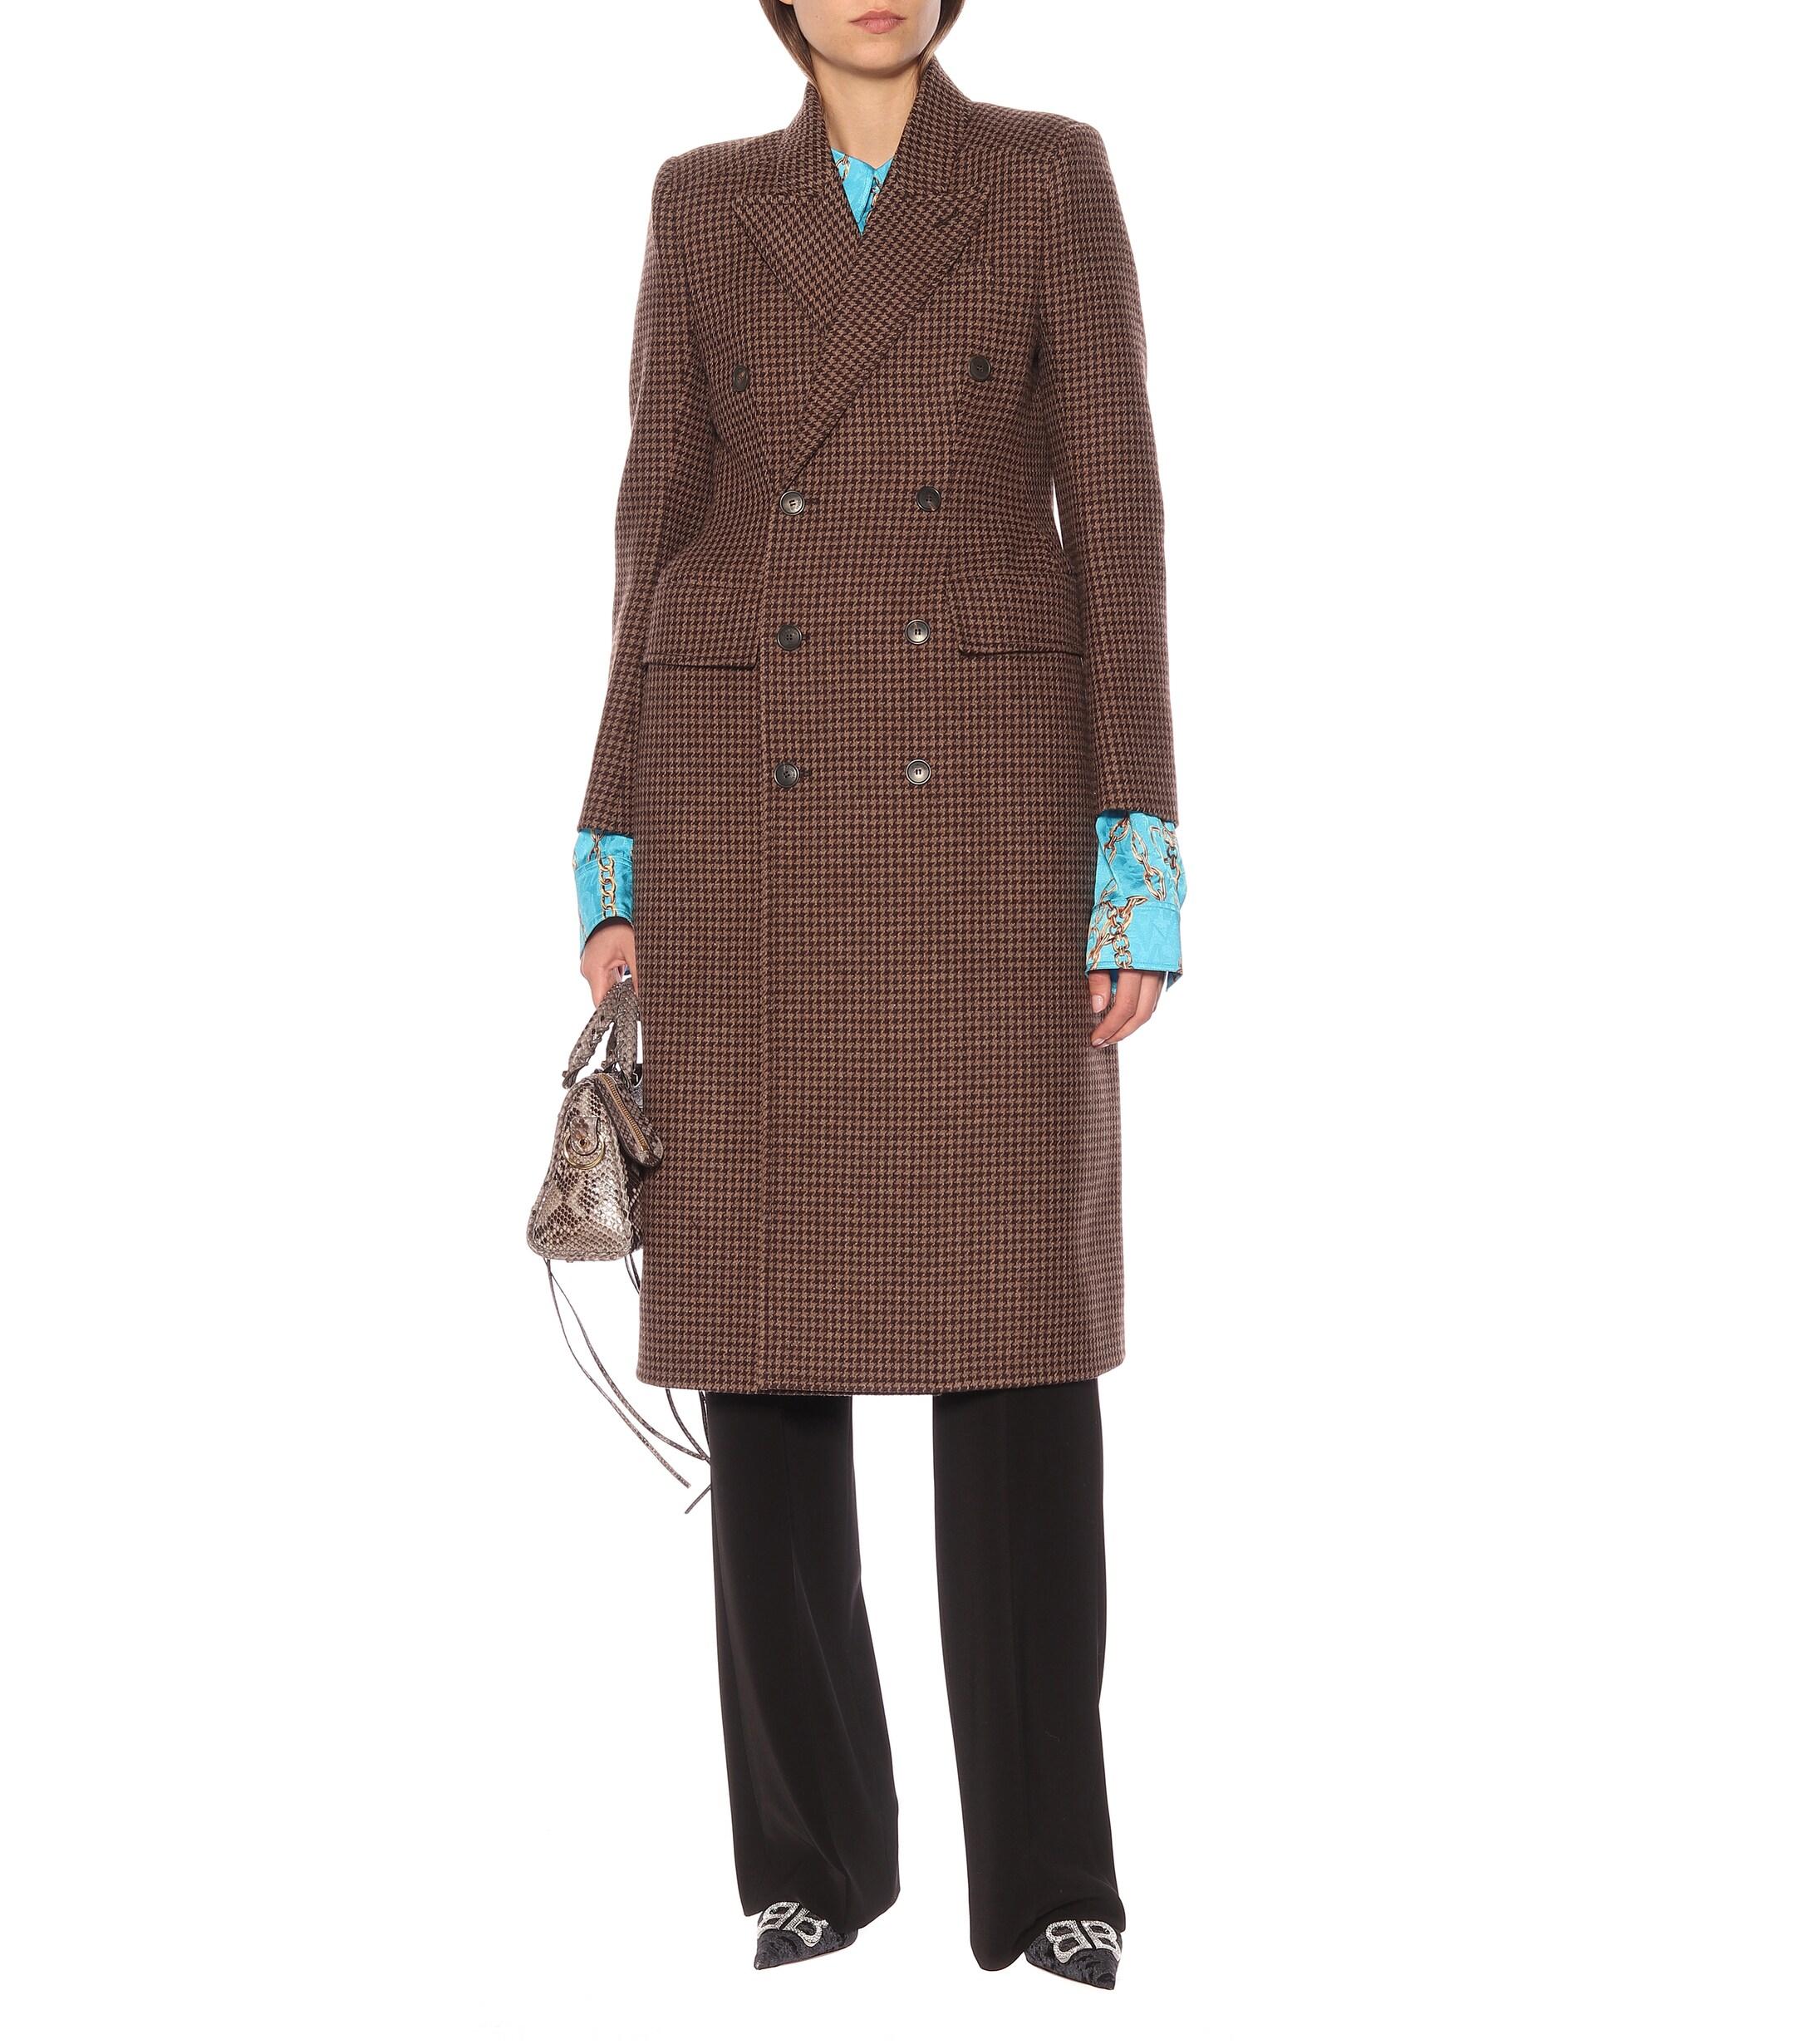 Balenciaga Hourglass Checked Wool Coat in Brown - Lyst